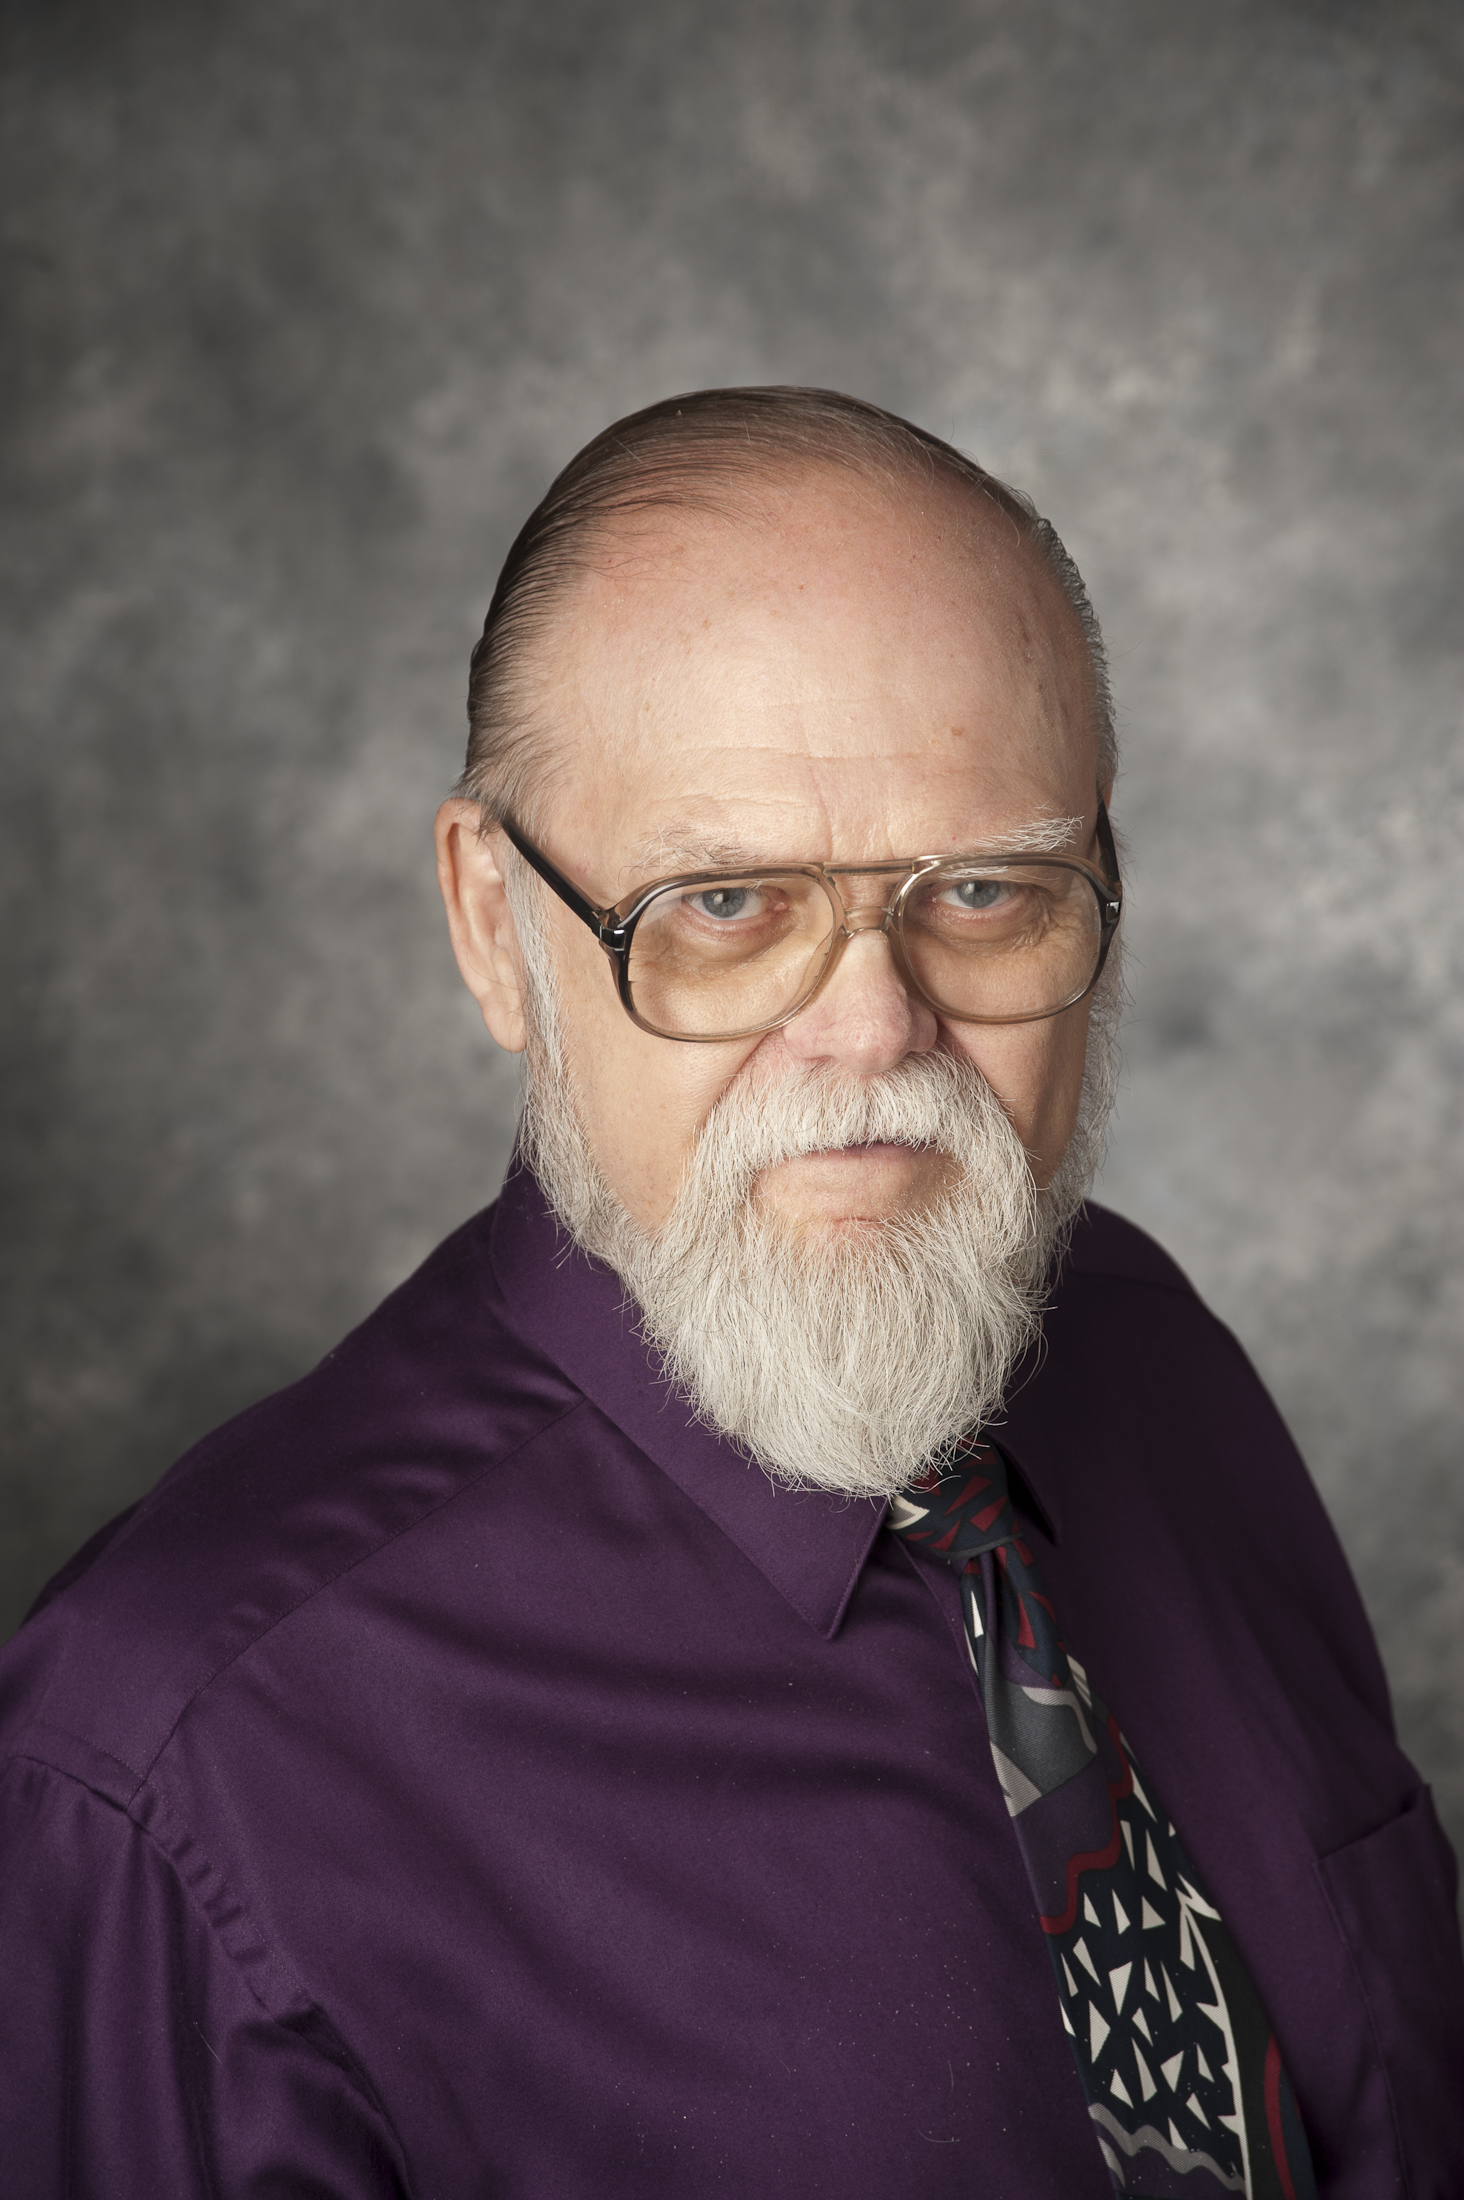 A headshot of Richard Helgason, a member of the Lyle School of Engineering Faculty.